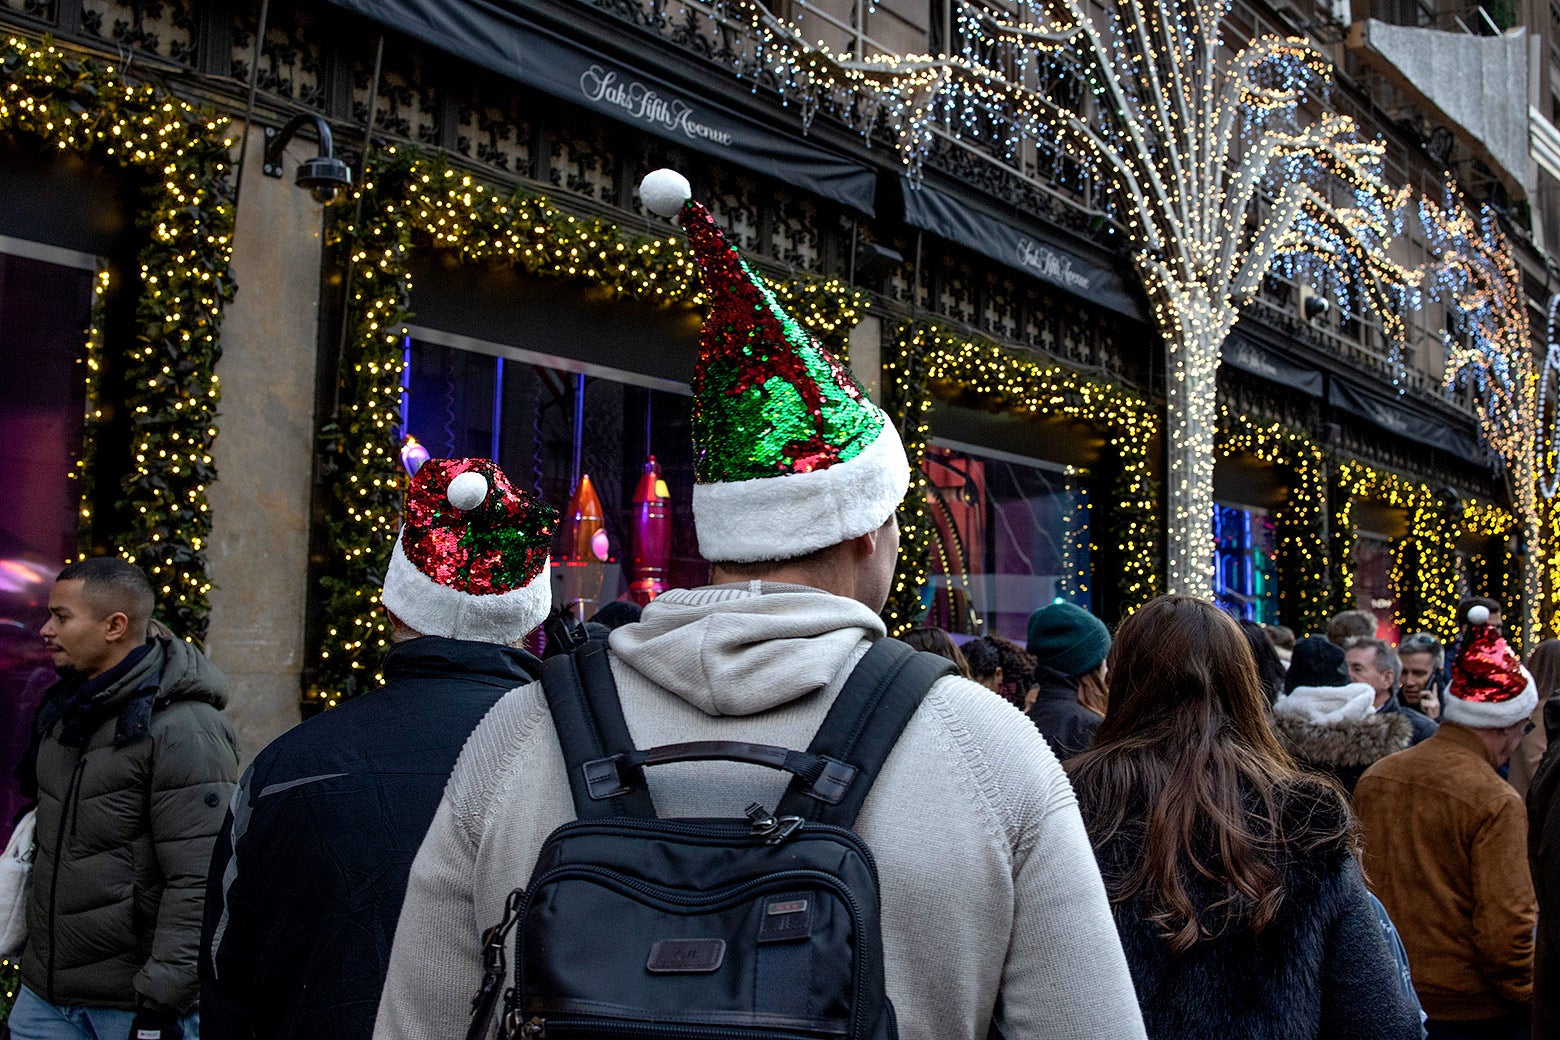 Shoppers on a holiday light-covered 5th Avenue in New York City. They have festive hats.